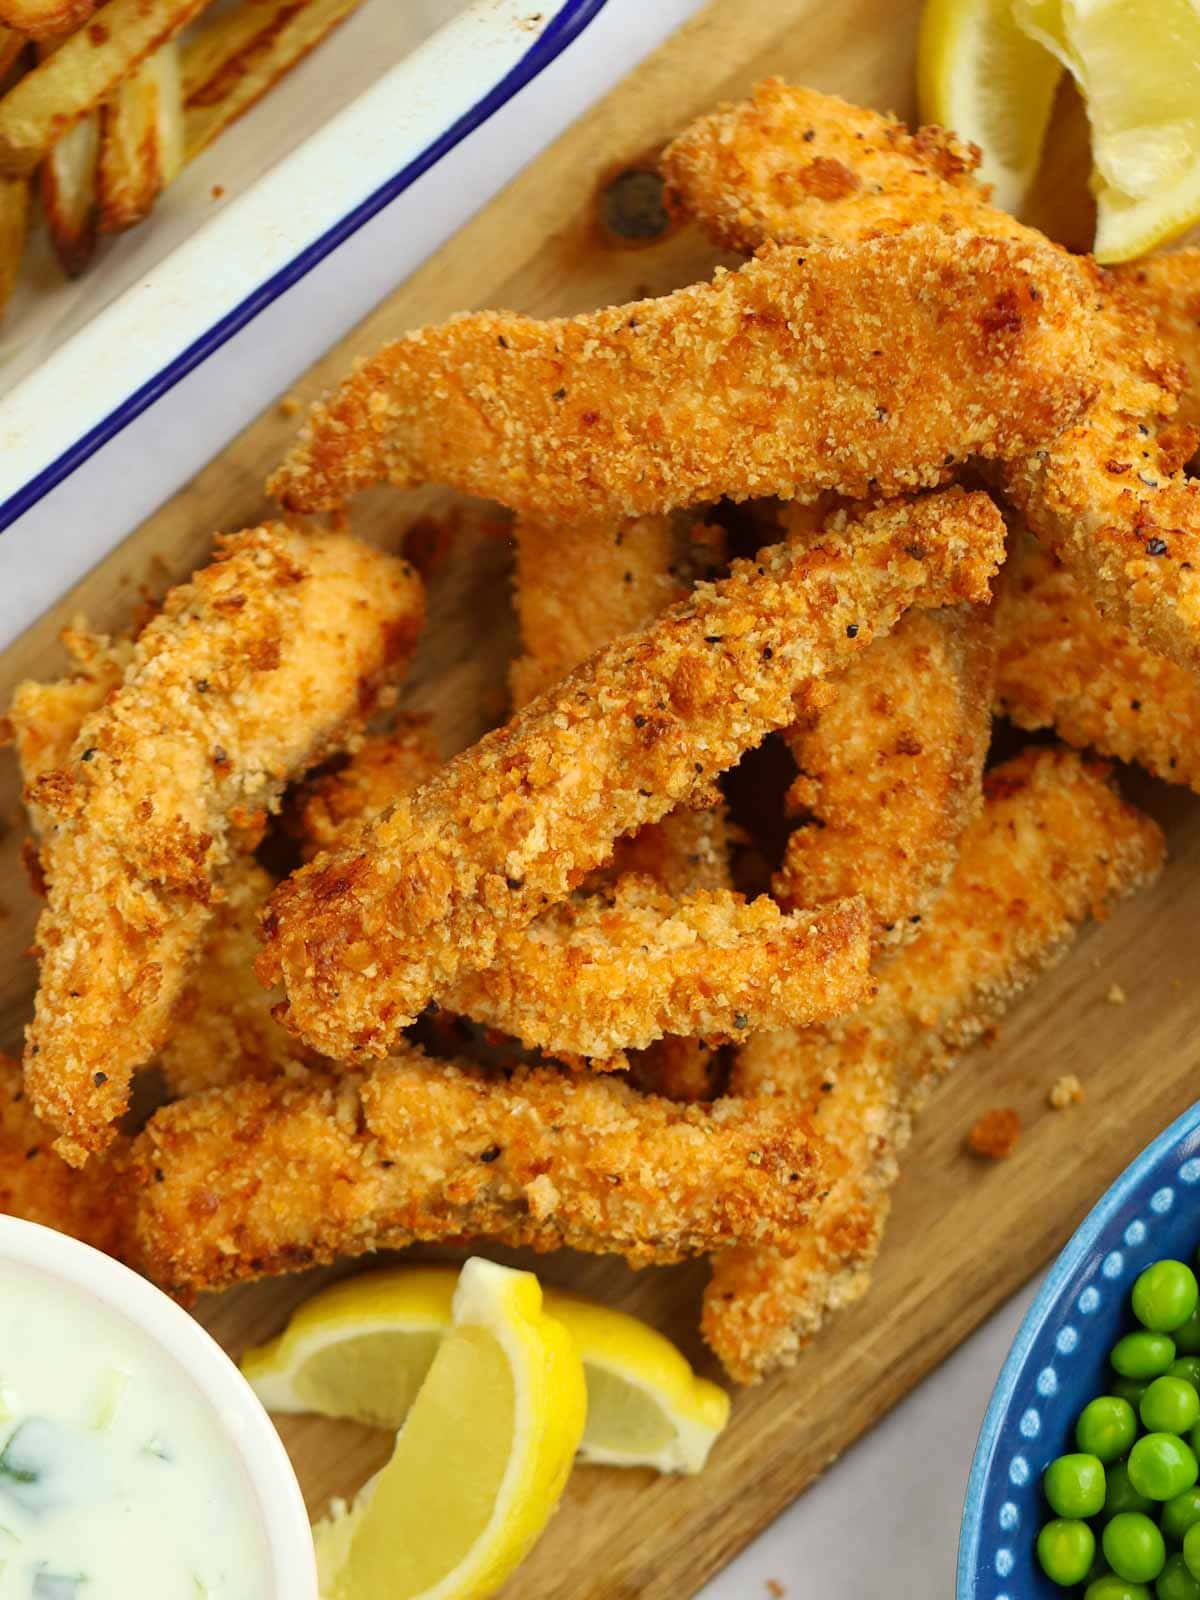 Oven baked salmon fish fingers recipe for a delicious midweek meal